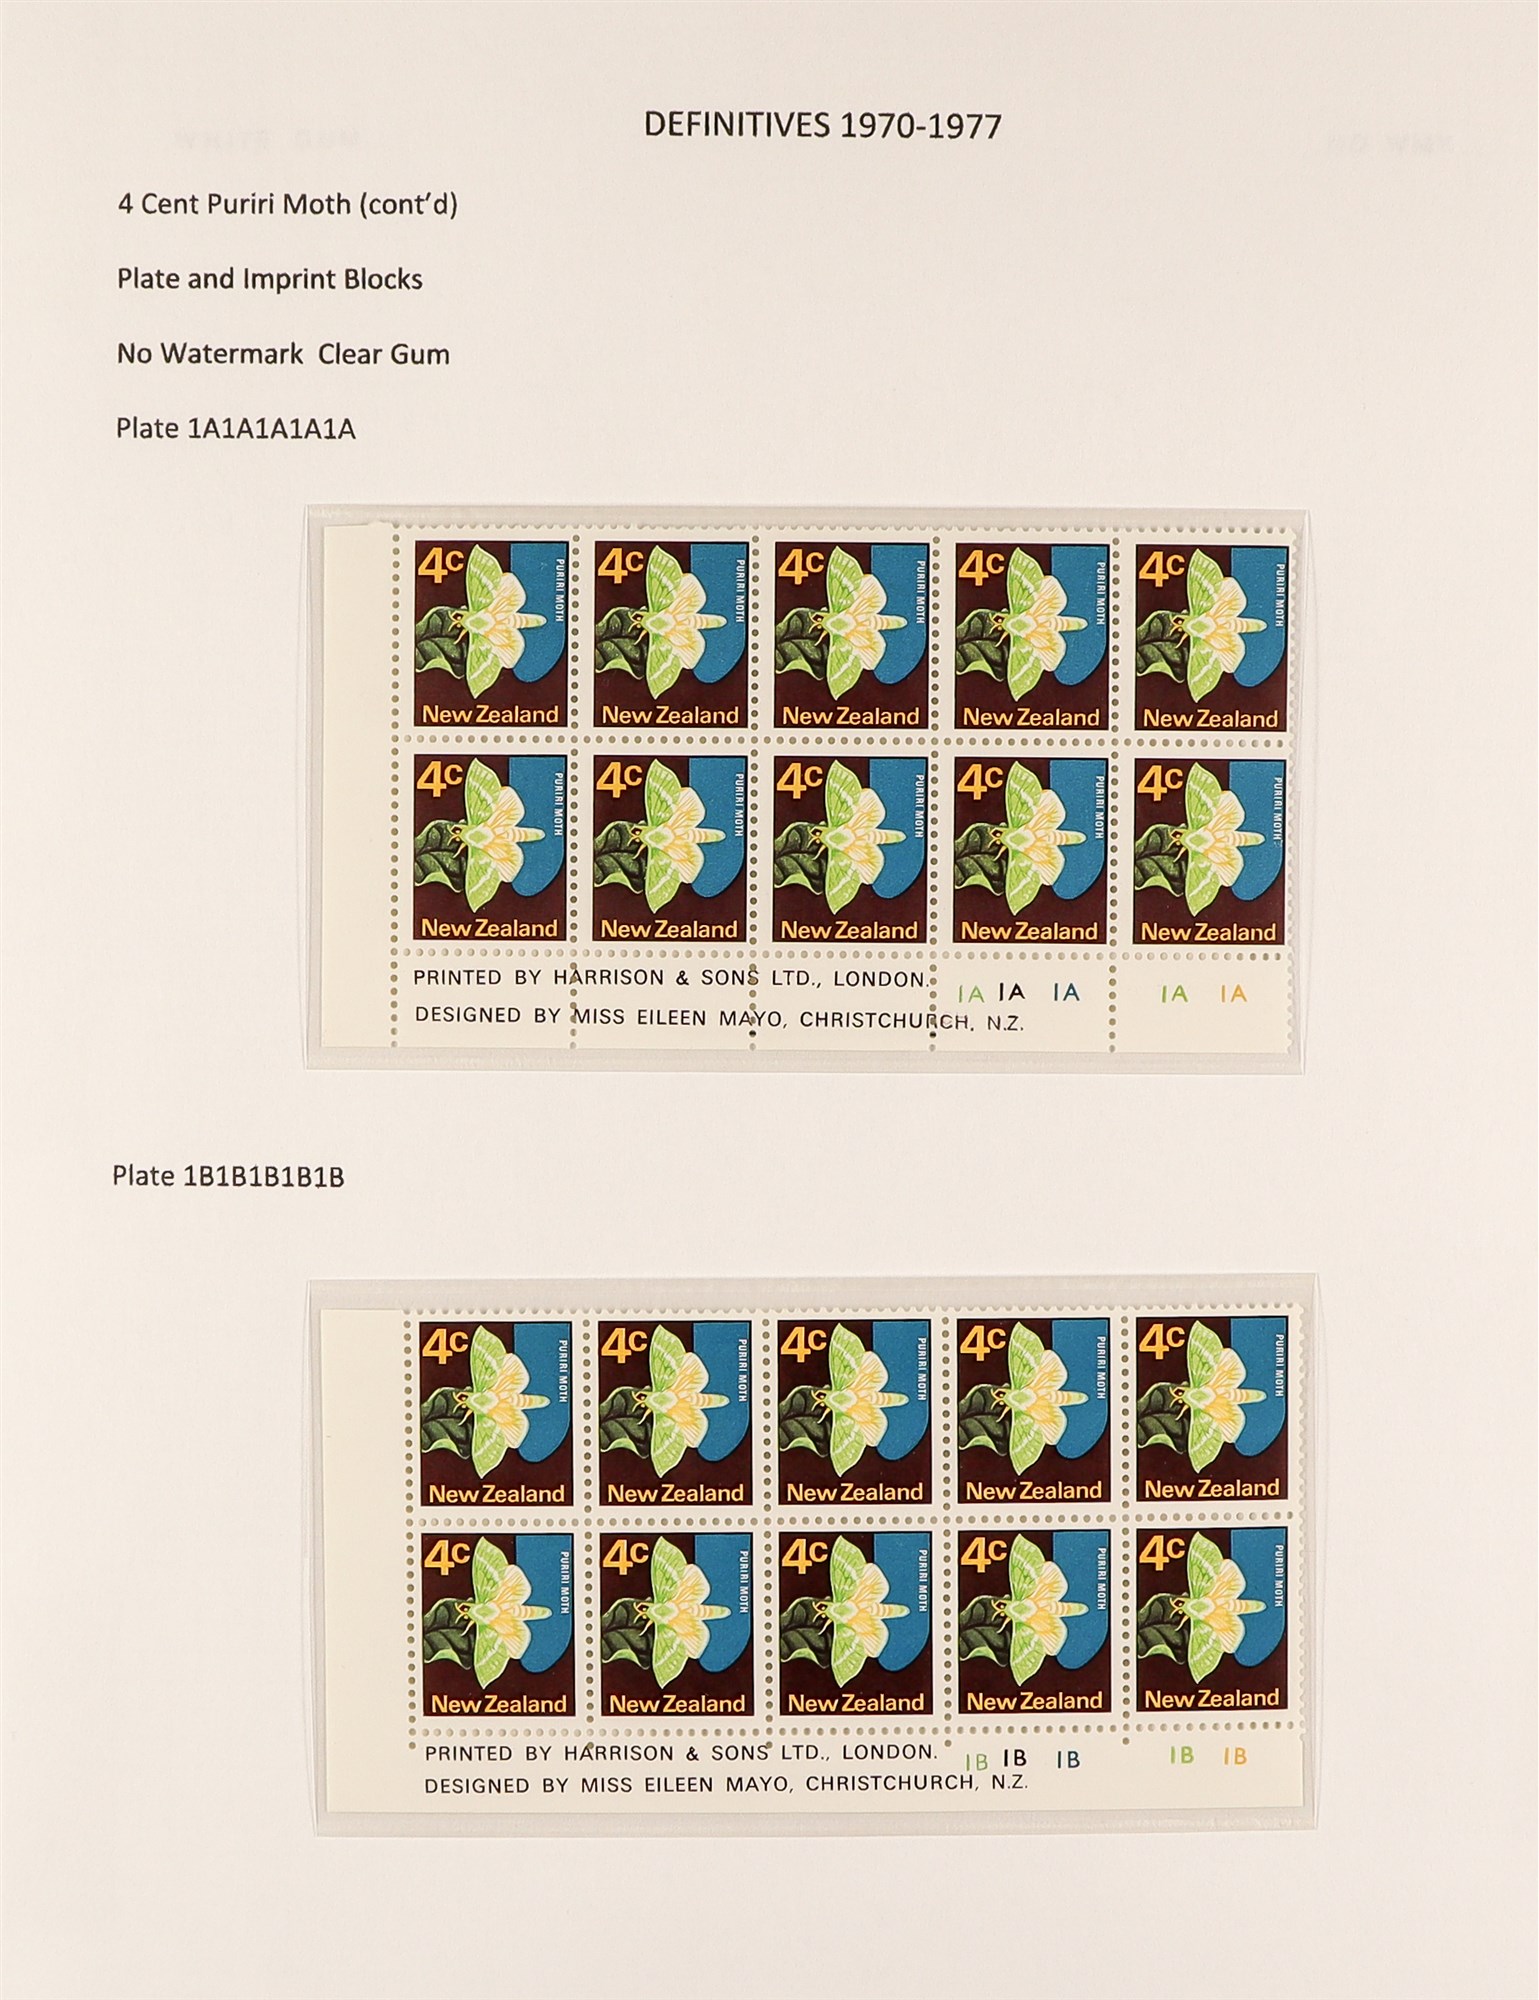 NEW ZEALAND 1970 - 1976 PICTORIALS SPECIALIZED COLLECTION of 110+ never hinged mint plate + - Image 3 of 11